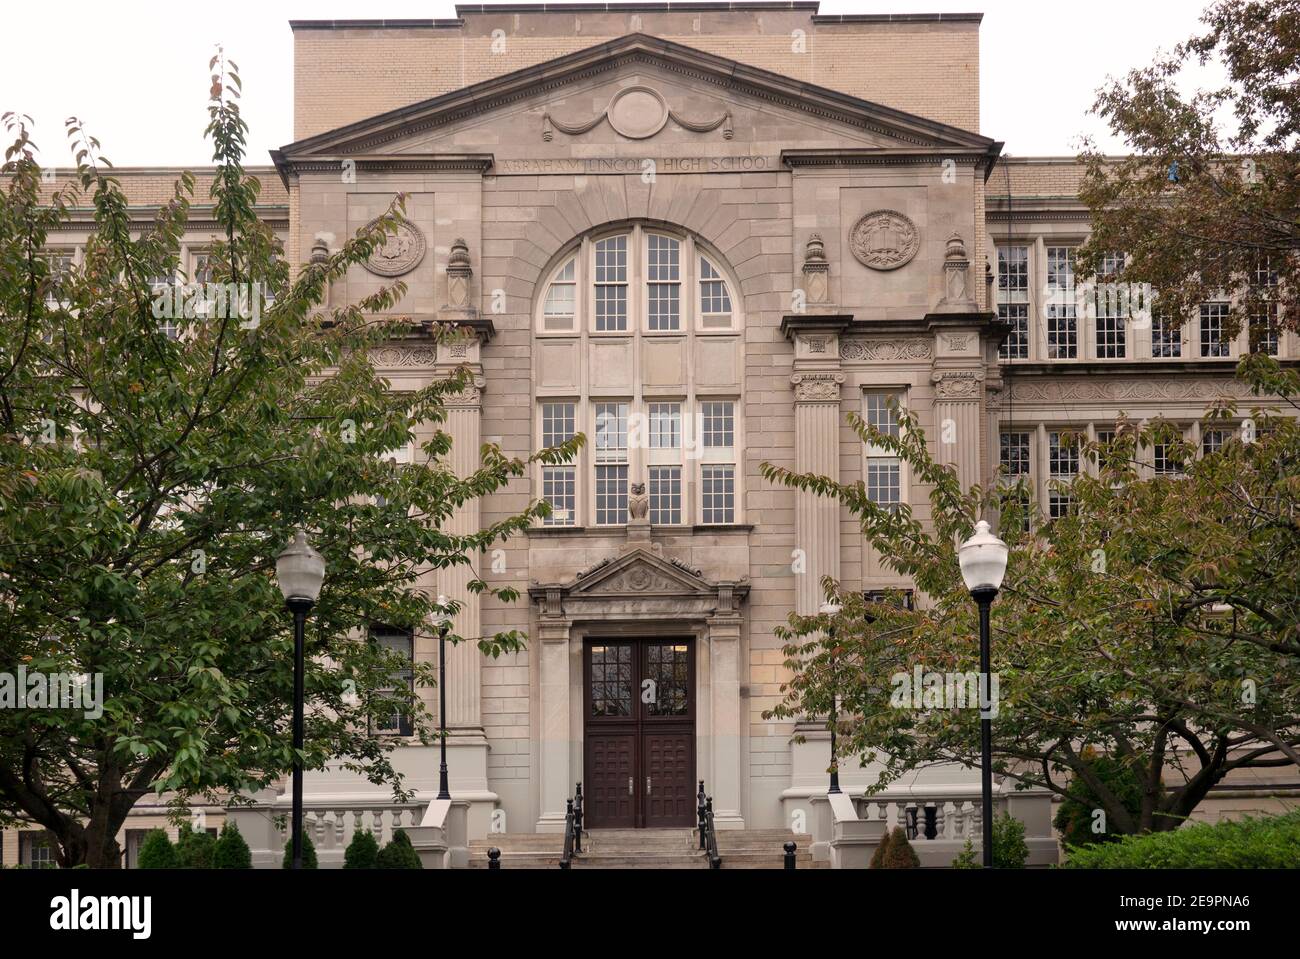 Abraham Lincoln High School sur Ocean Parkway à Coney Island Brooklyn, New York Banque D'Images